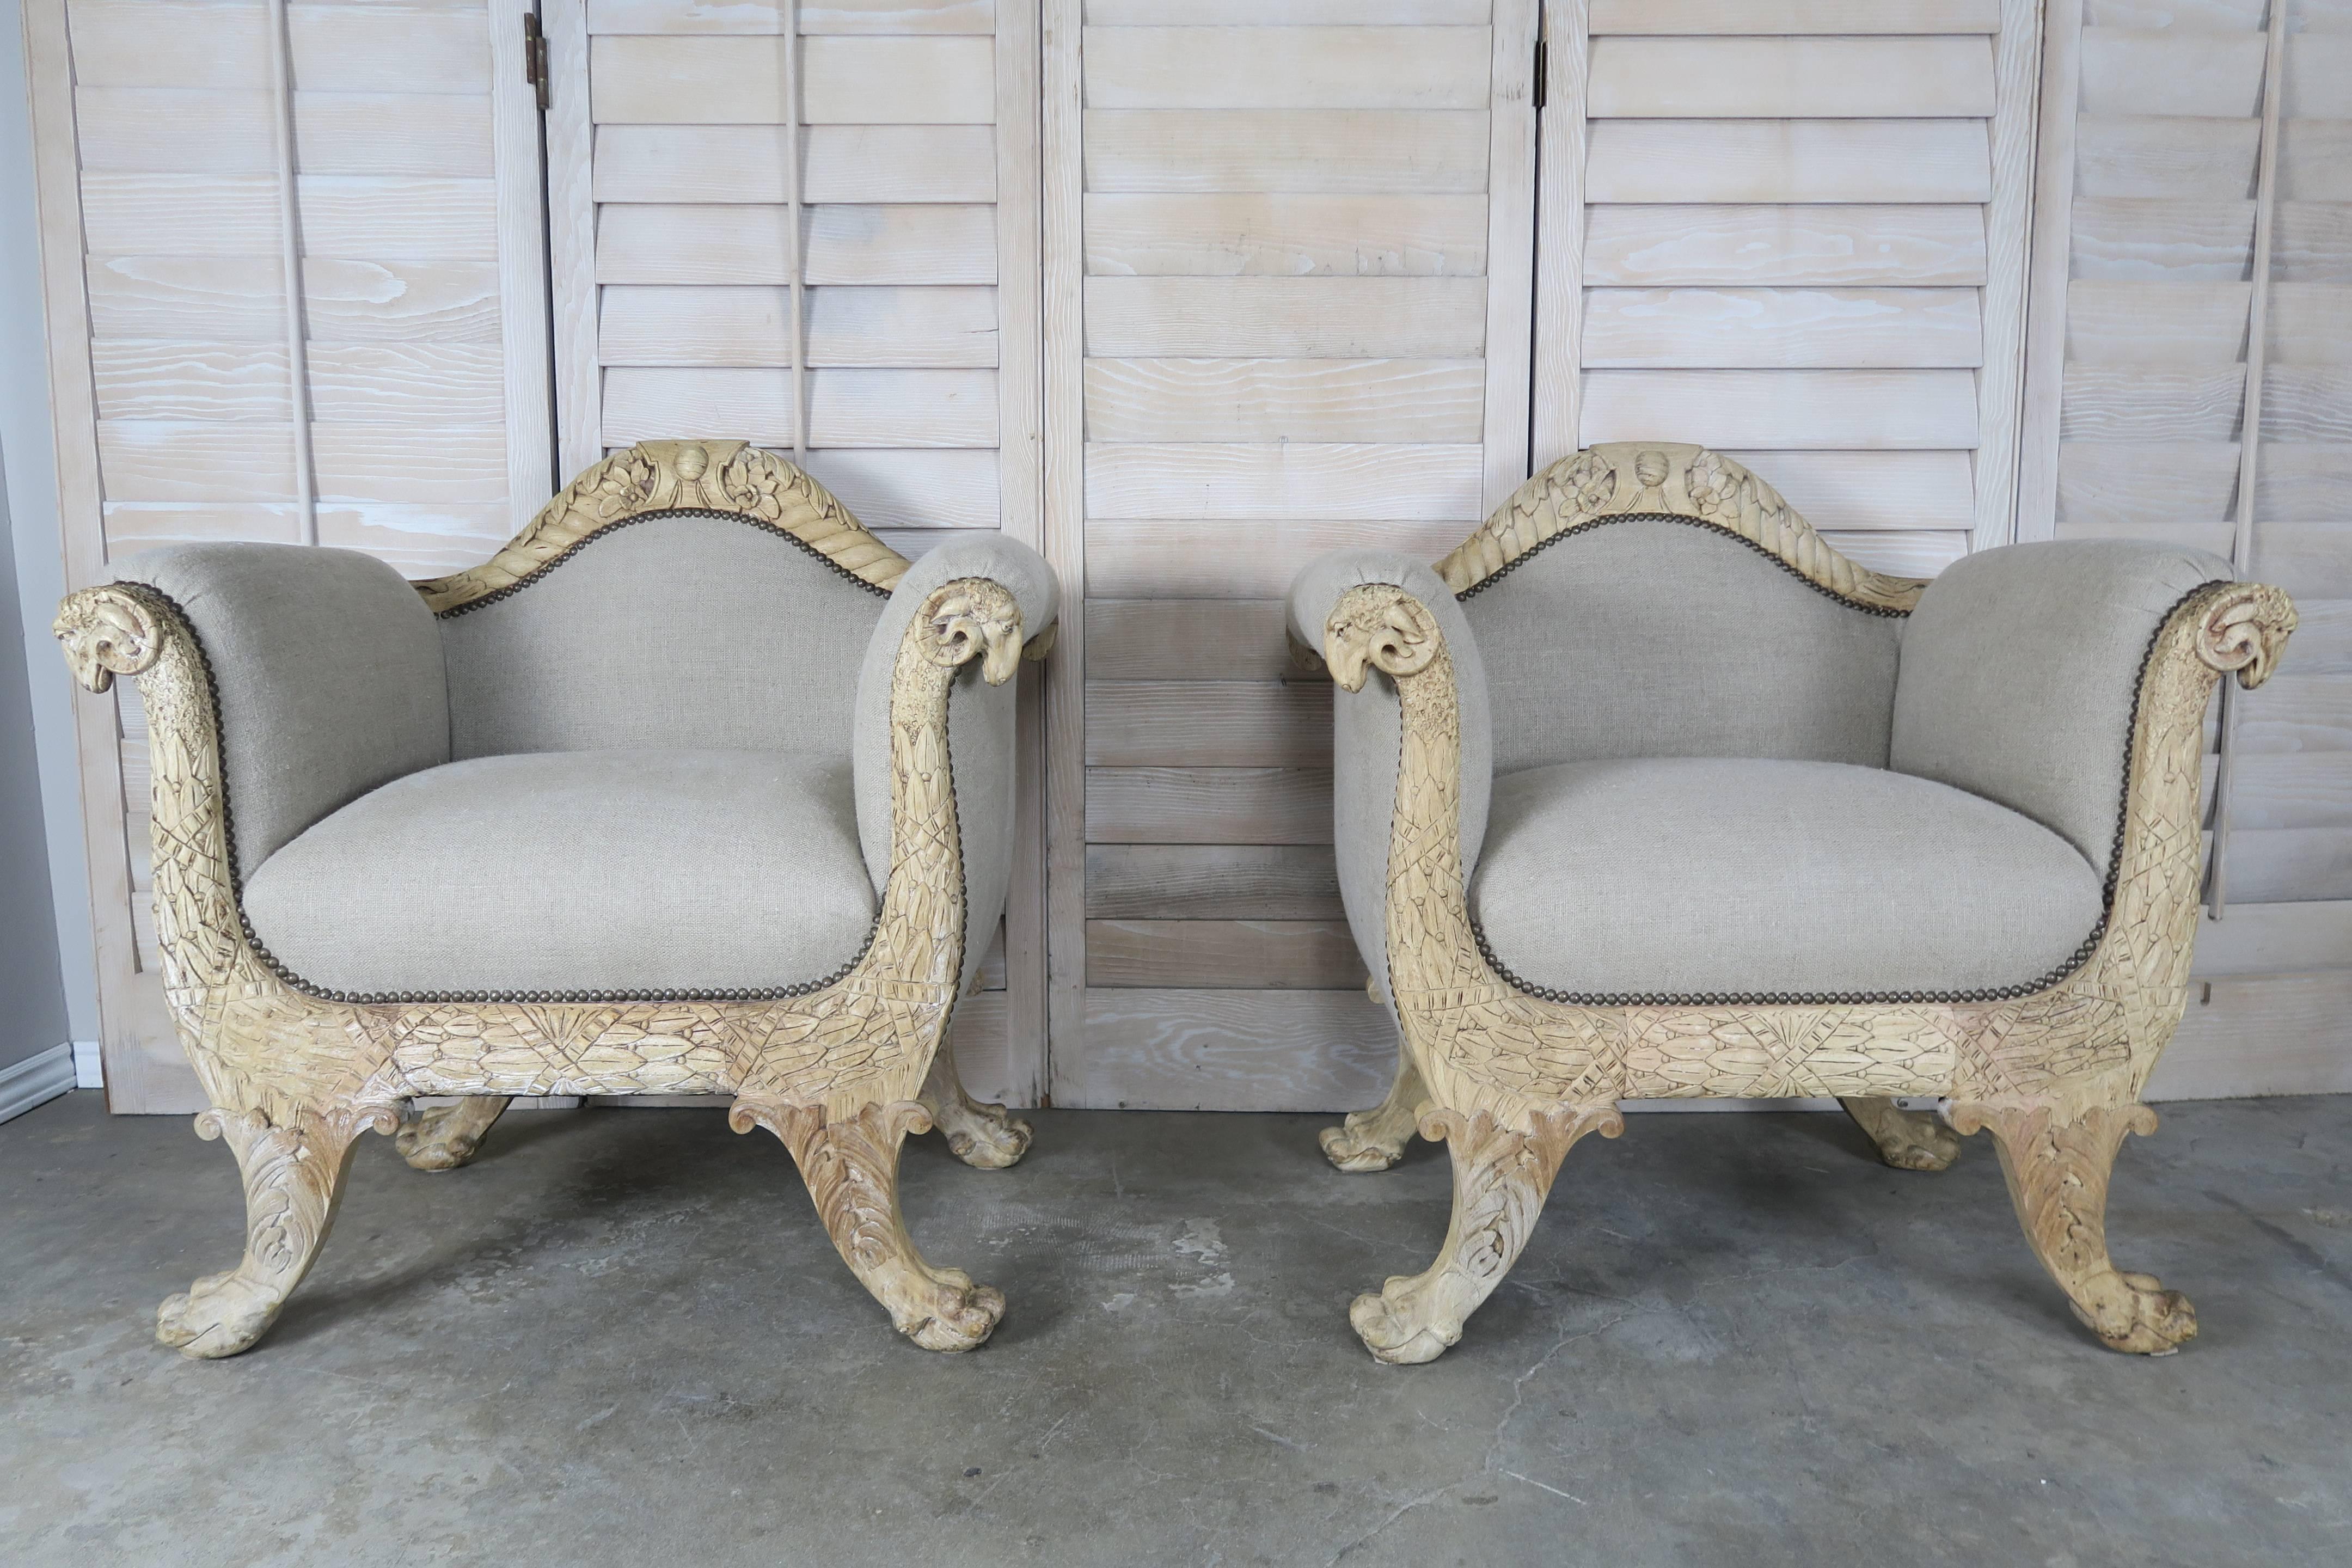 Pair of 19th century French beautifully carved armchairs depicting rams heads, angel wings, acanthus leaves and much more. The chairs stand on lion paw feet and have a beautiful bleached walnut finish. The chairs are newly upholstered in natural